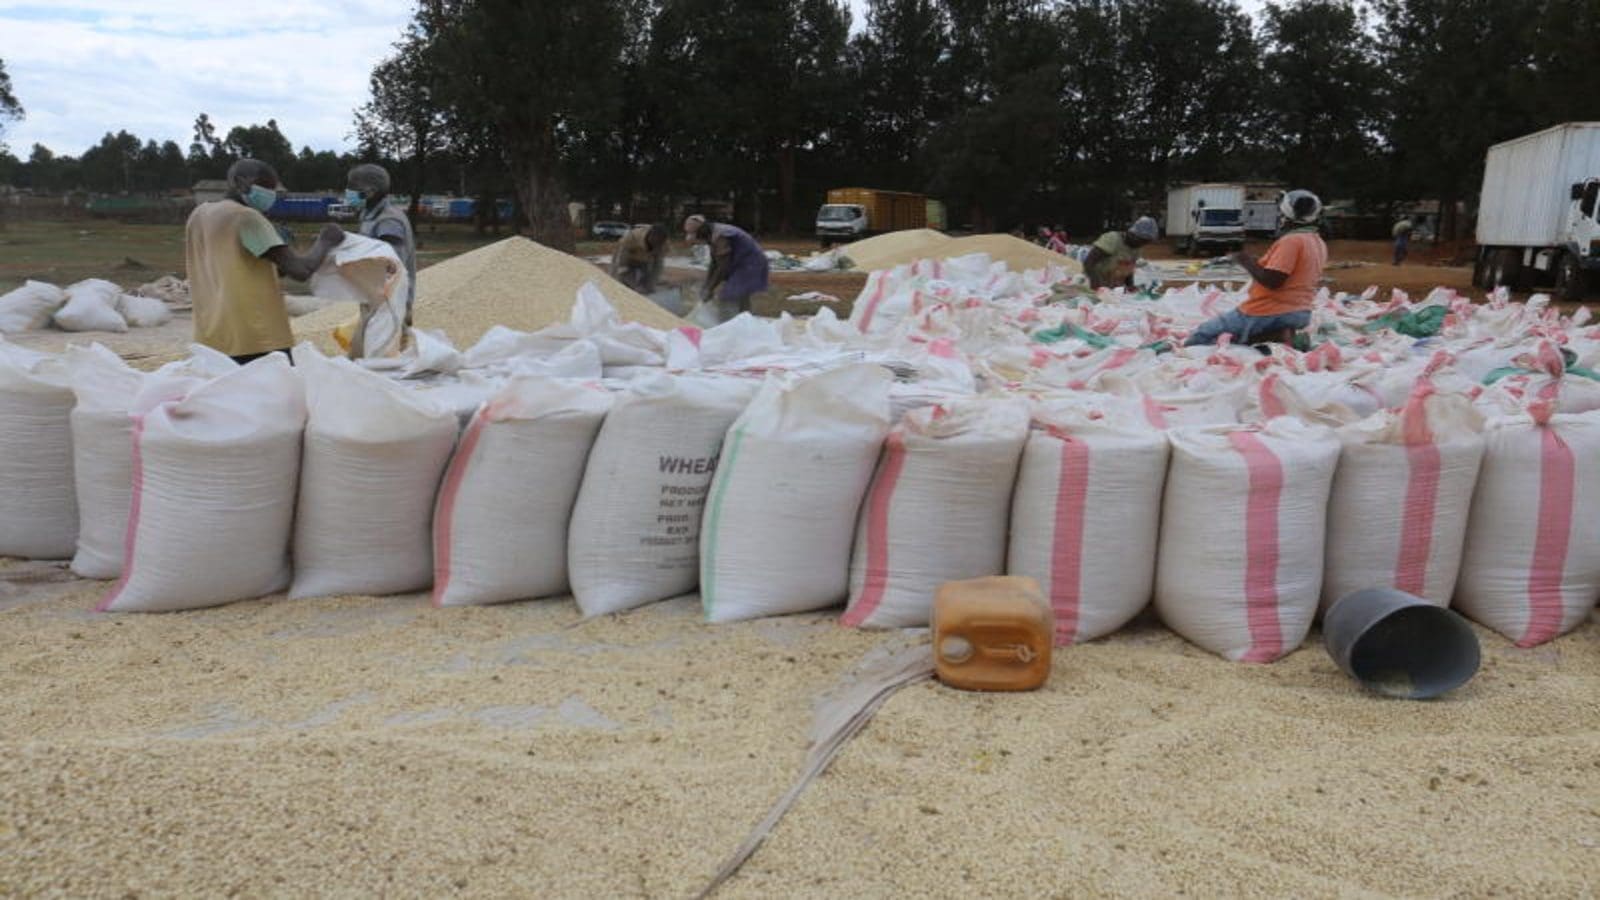 Kenya to spend US$13.4M on grain dryers ahead of the predicted El Niño, expects 40 million bags of maize